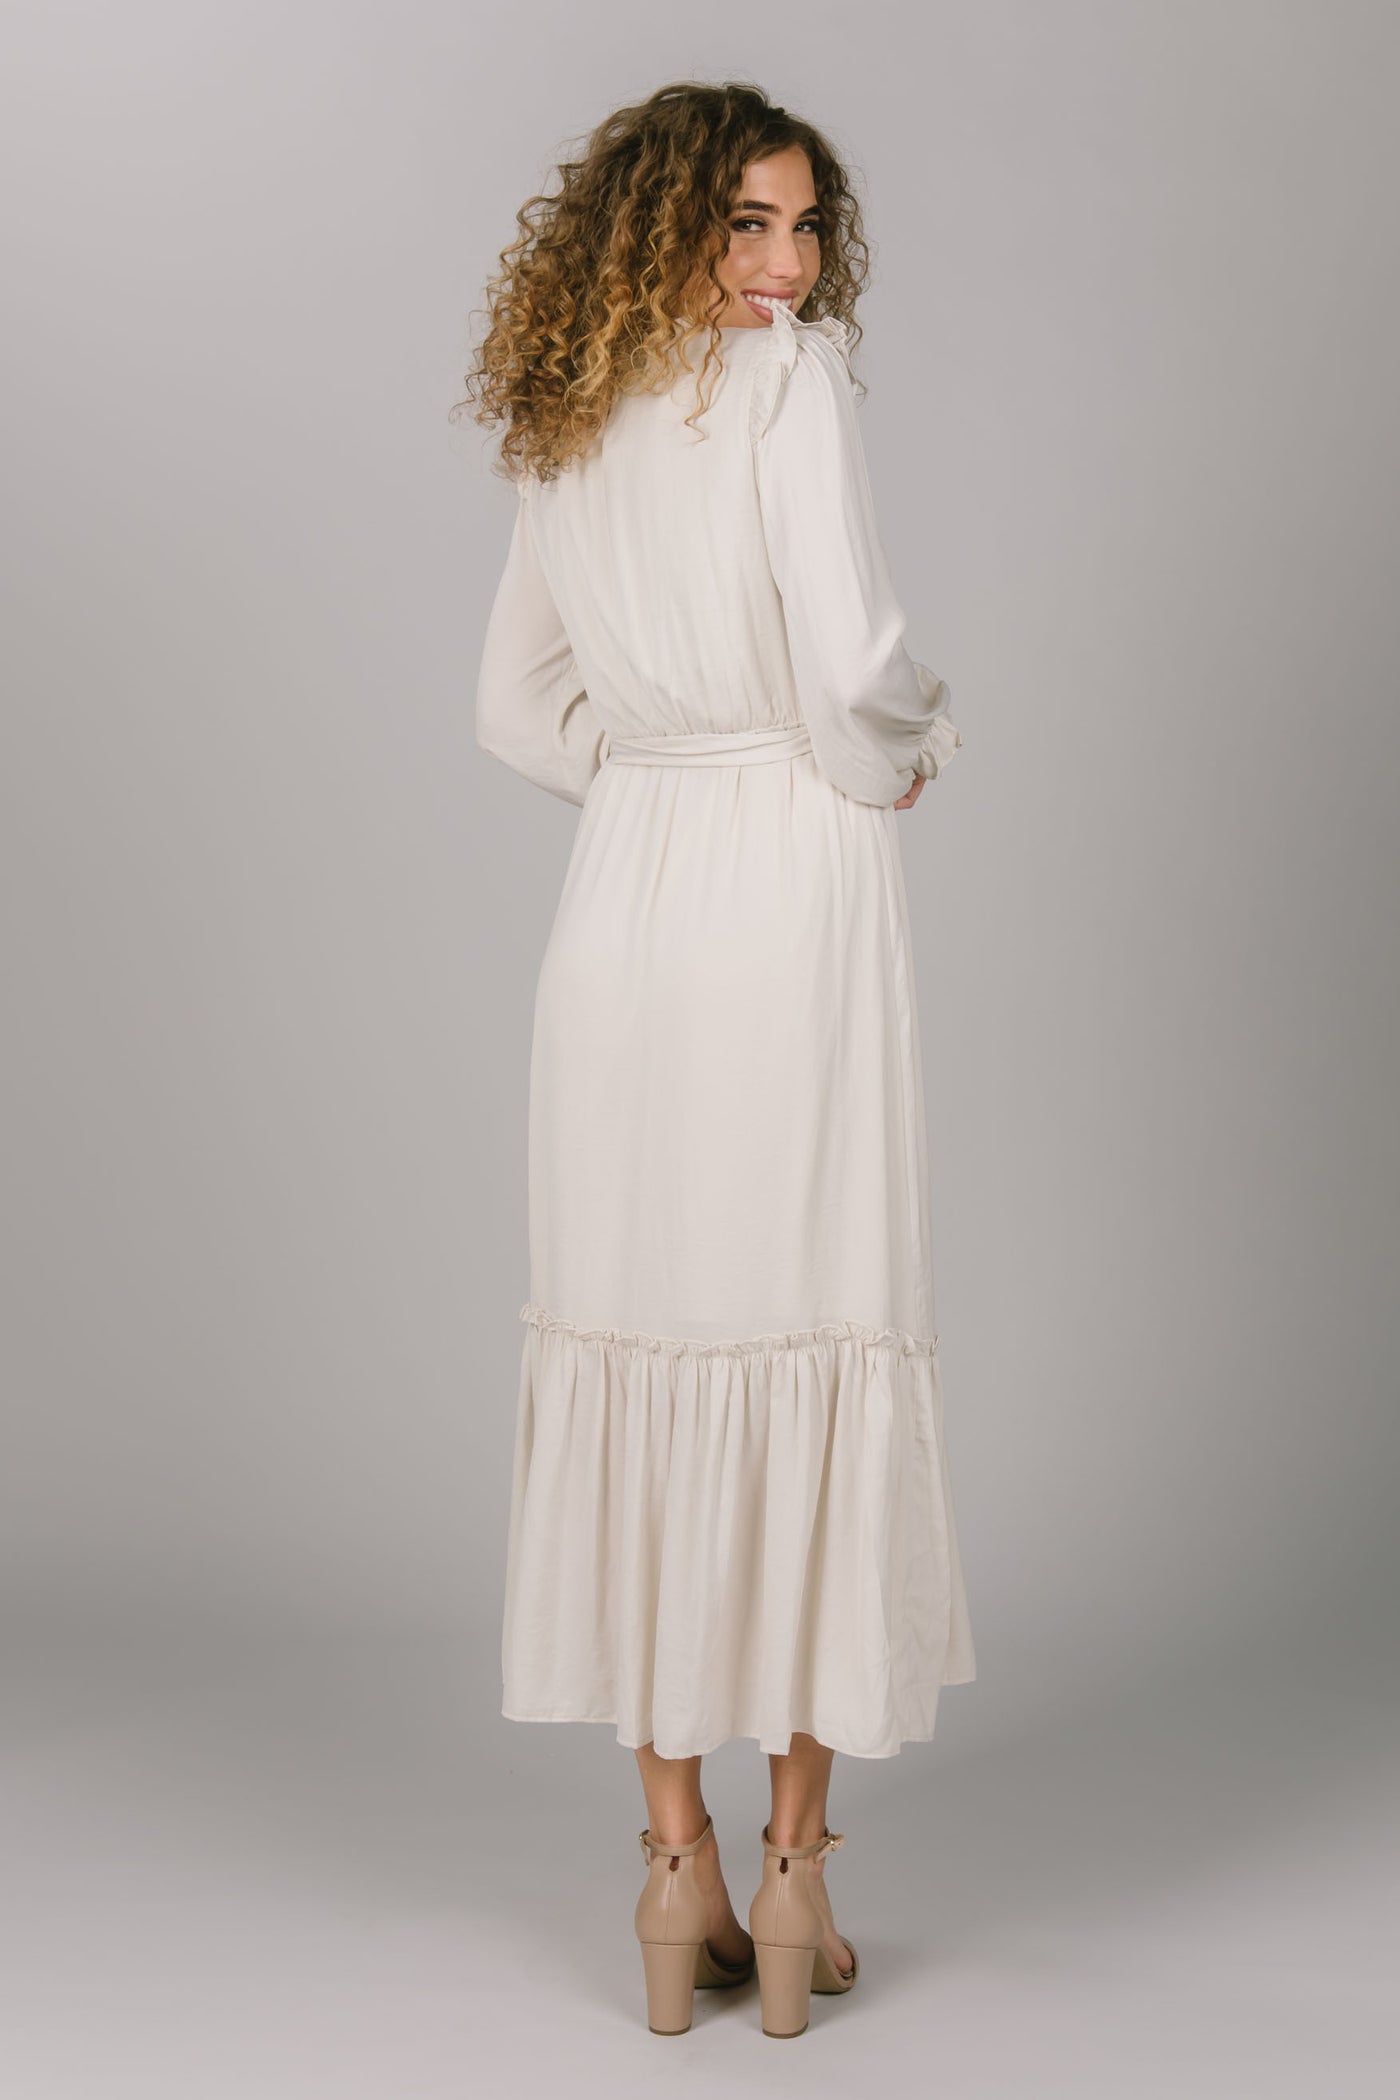 Back view of the Ivory modest everyday dress. It has a tie waist, long sleeves, and a tiered skirt. Everyday modest dress is perfect for a variety of occasions.